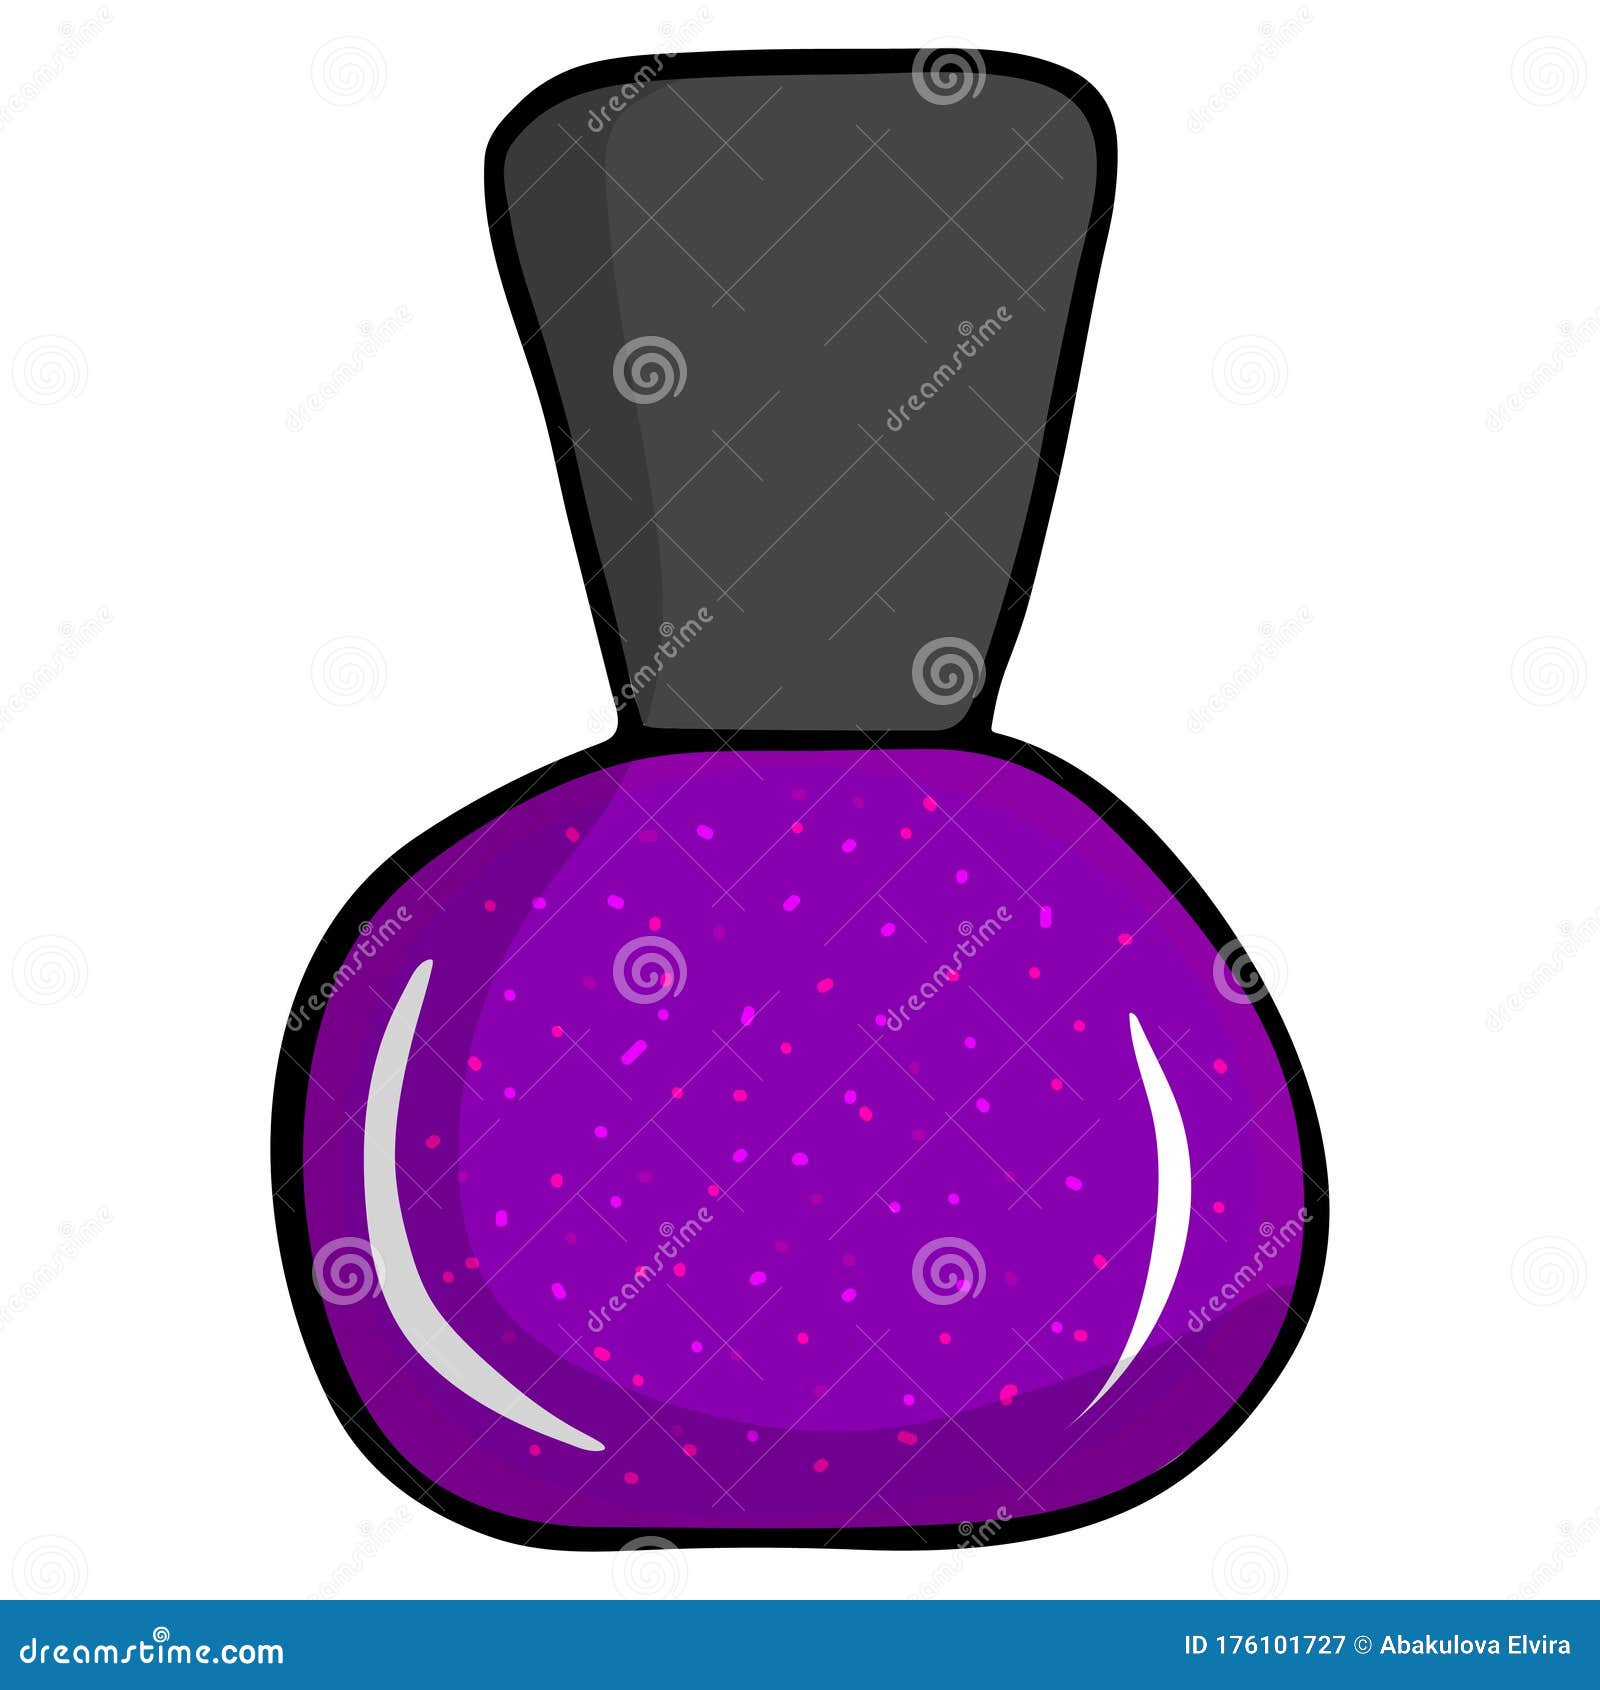 Hand Drawn Bottle of Nail Polish. Fashionable and Glamorous Purple Varnish  Stock Vector - Illustration of cosmetic, lacquer: 176101727